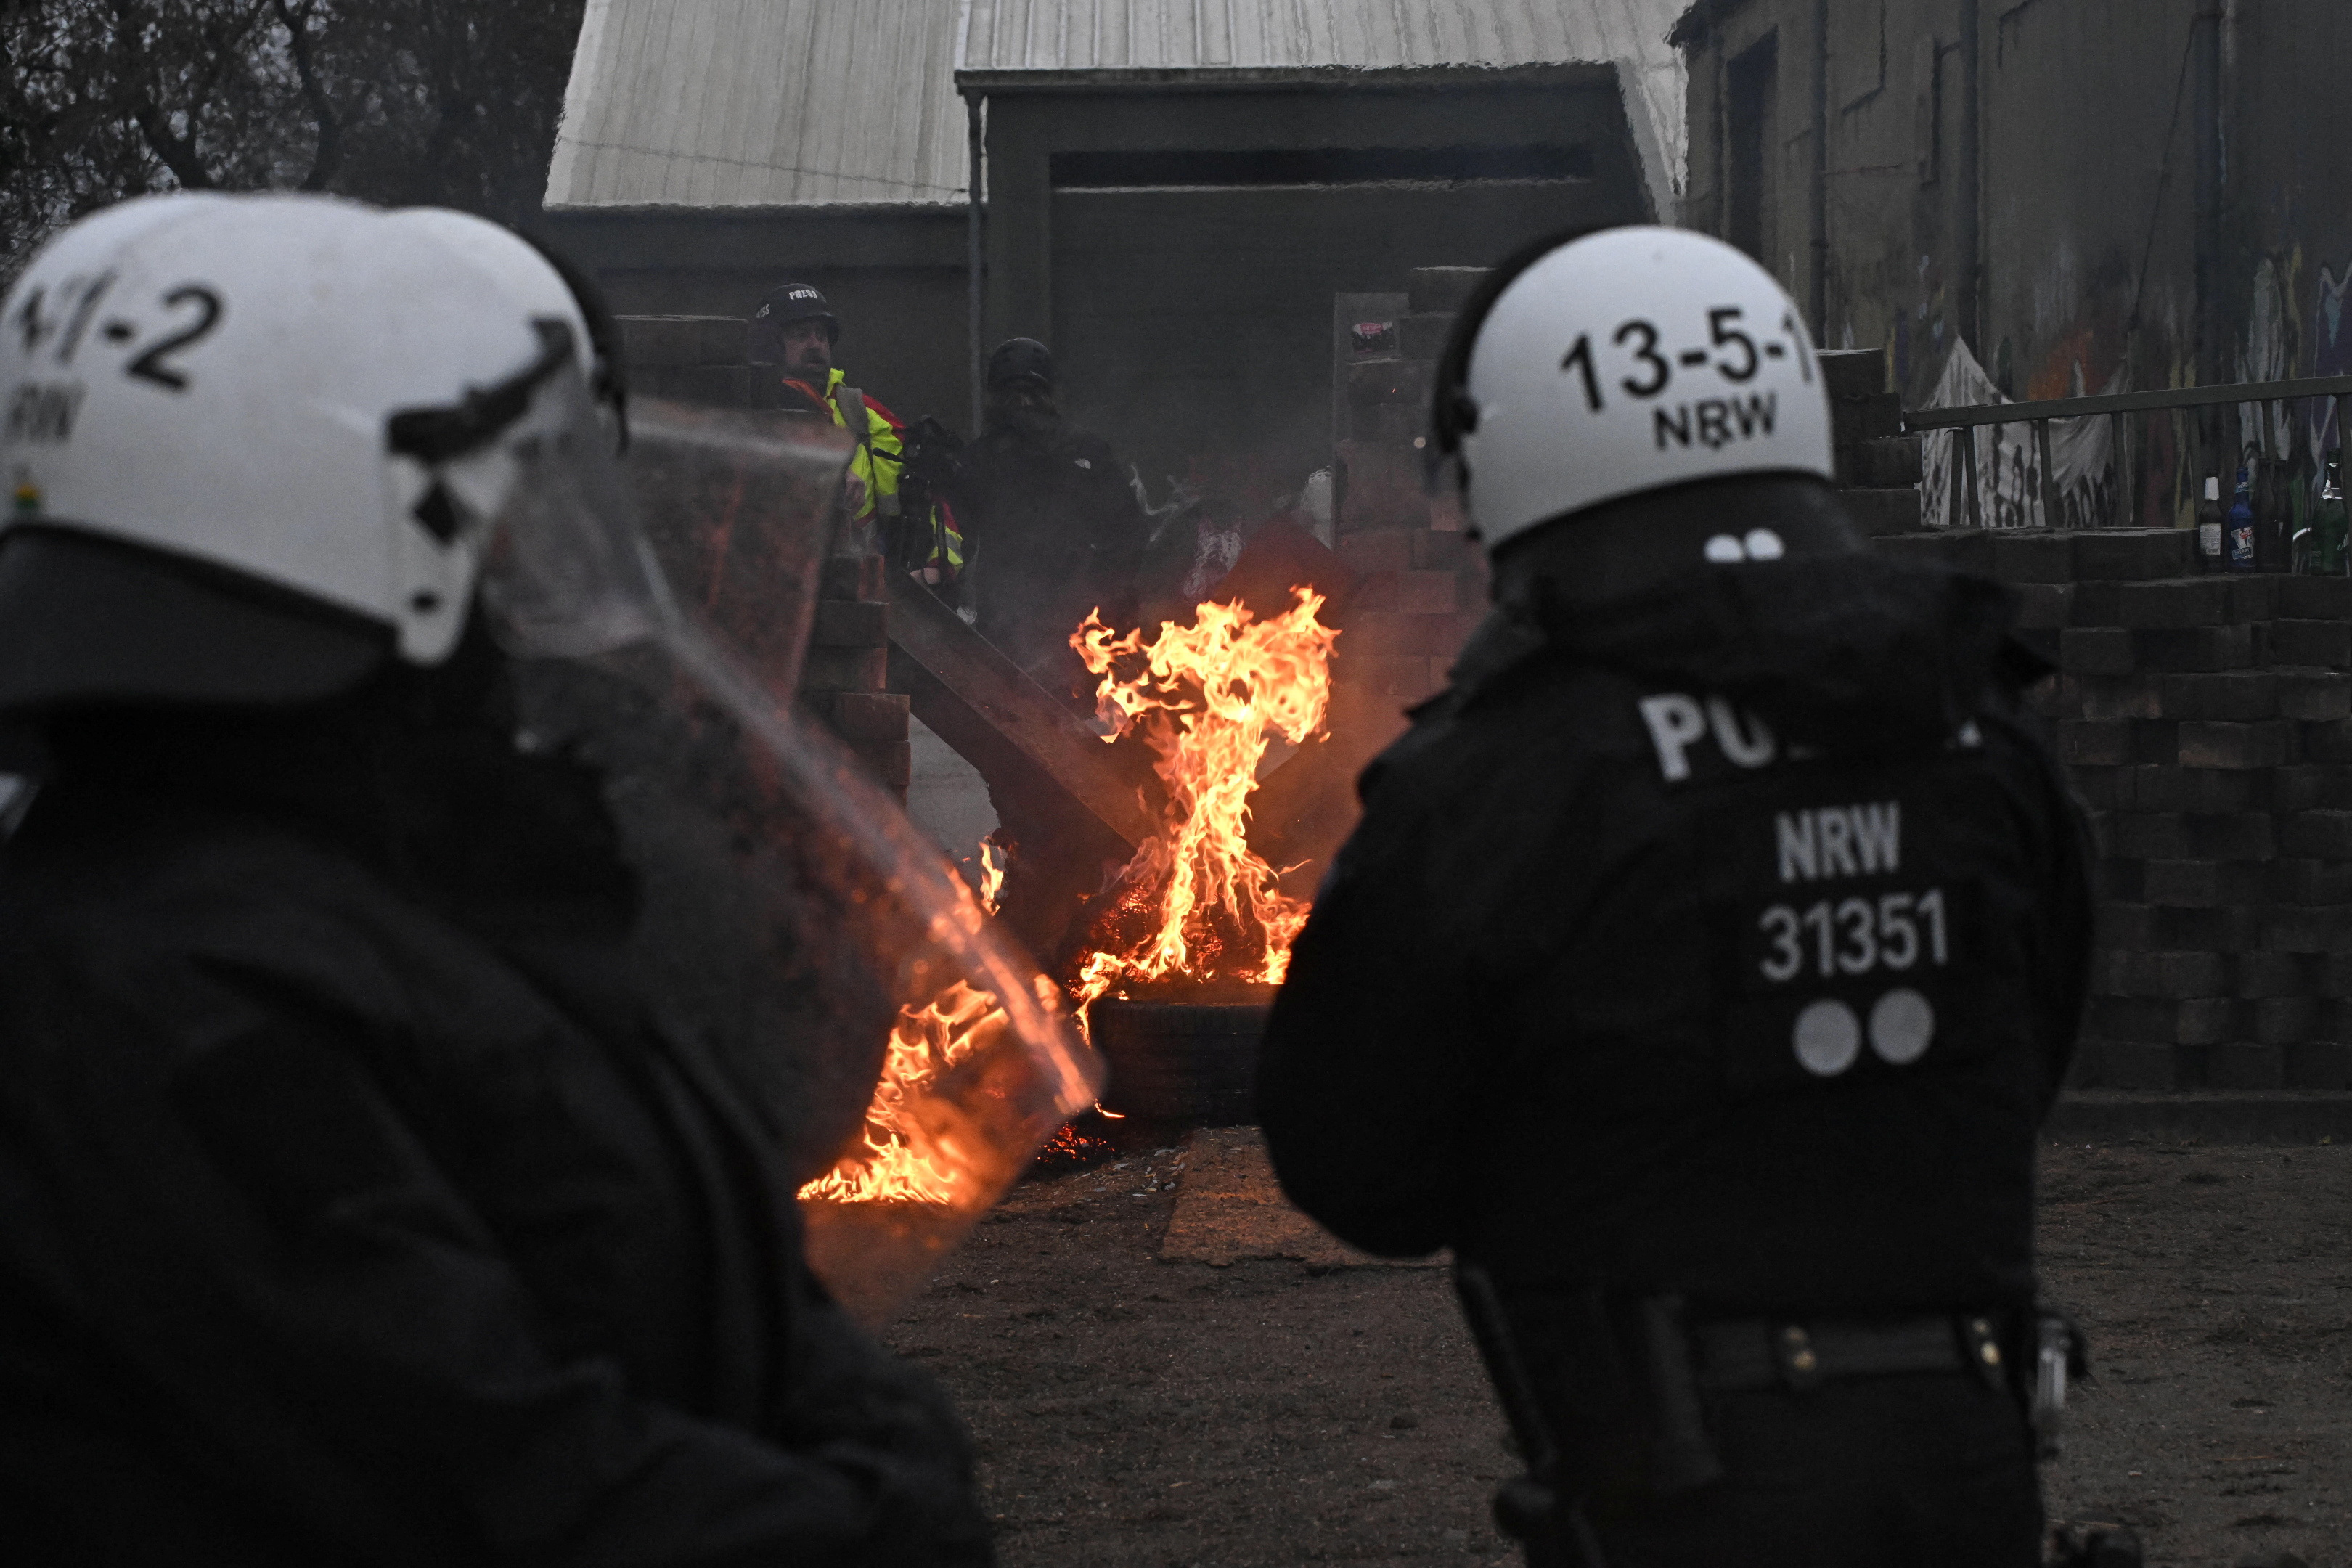 Demonstrators set tires on fire during the protest on Wednesday. /Benjamin Westhoff/Reuters